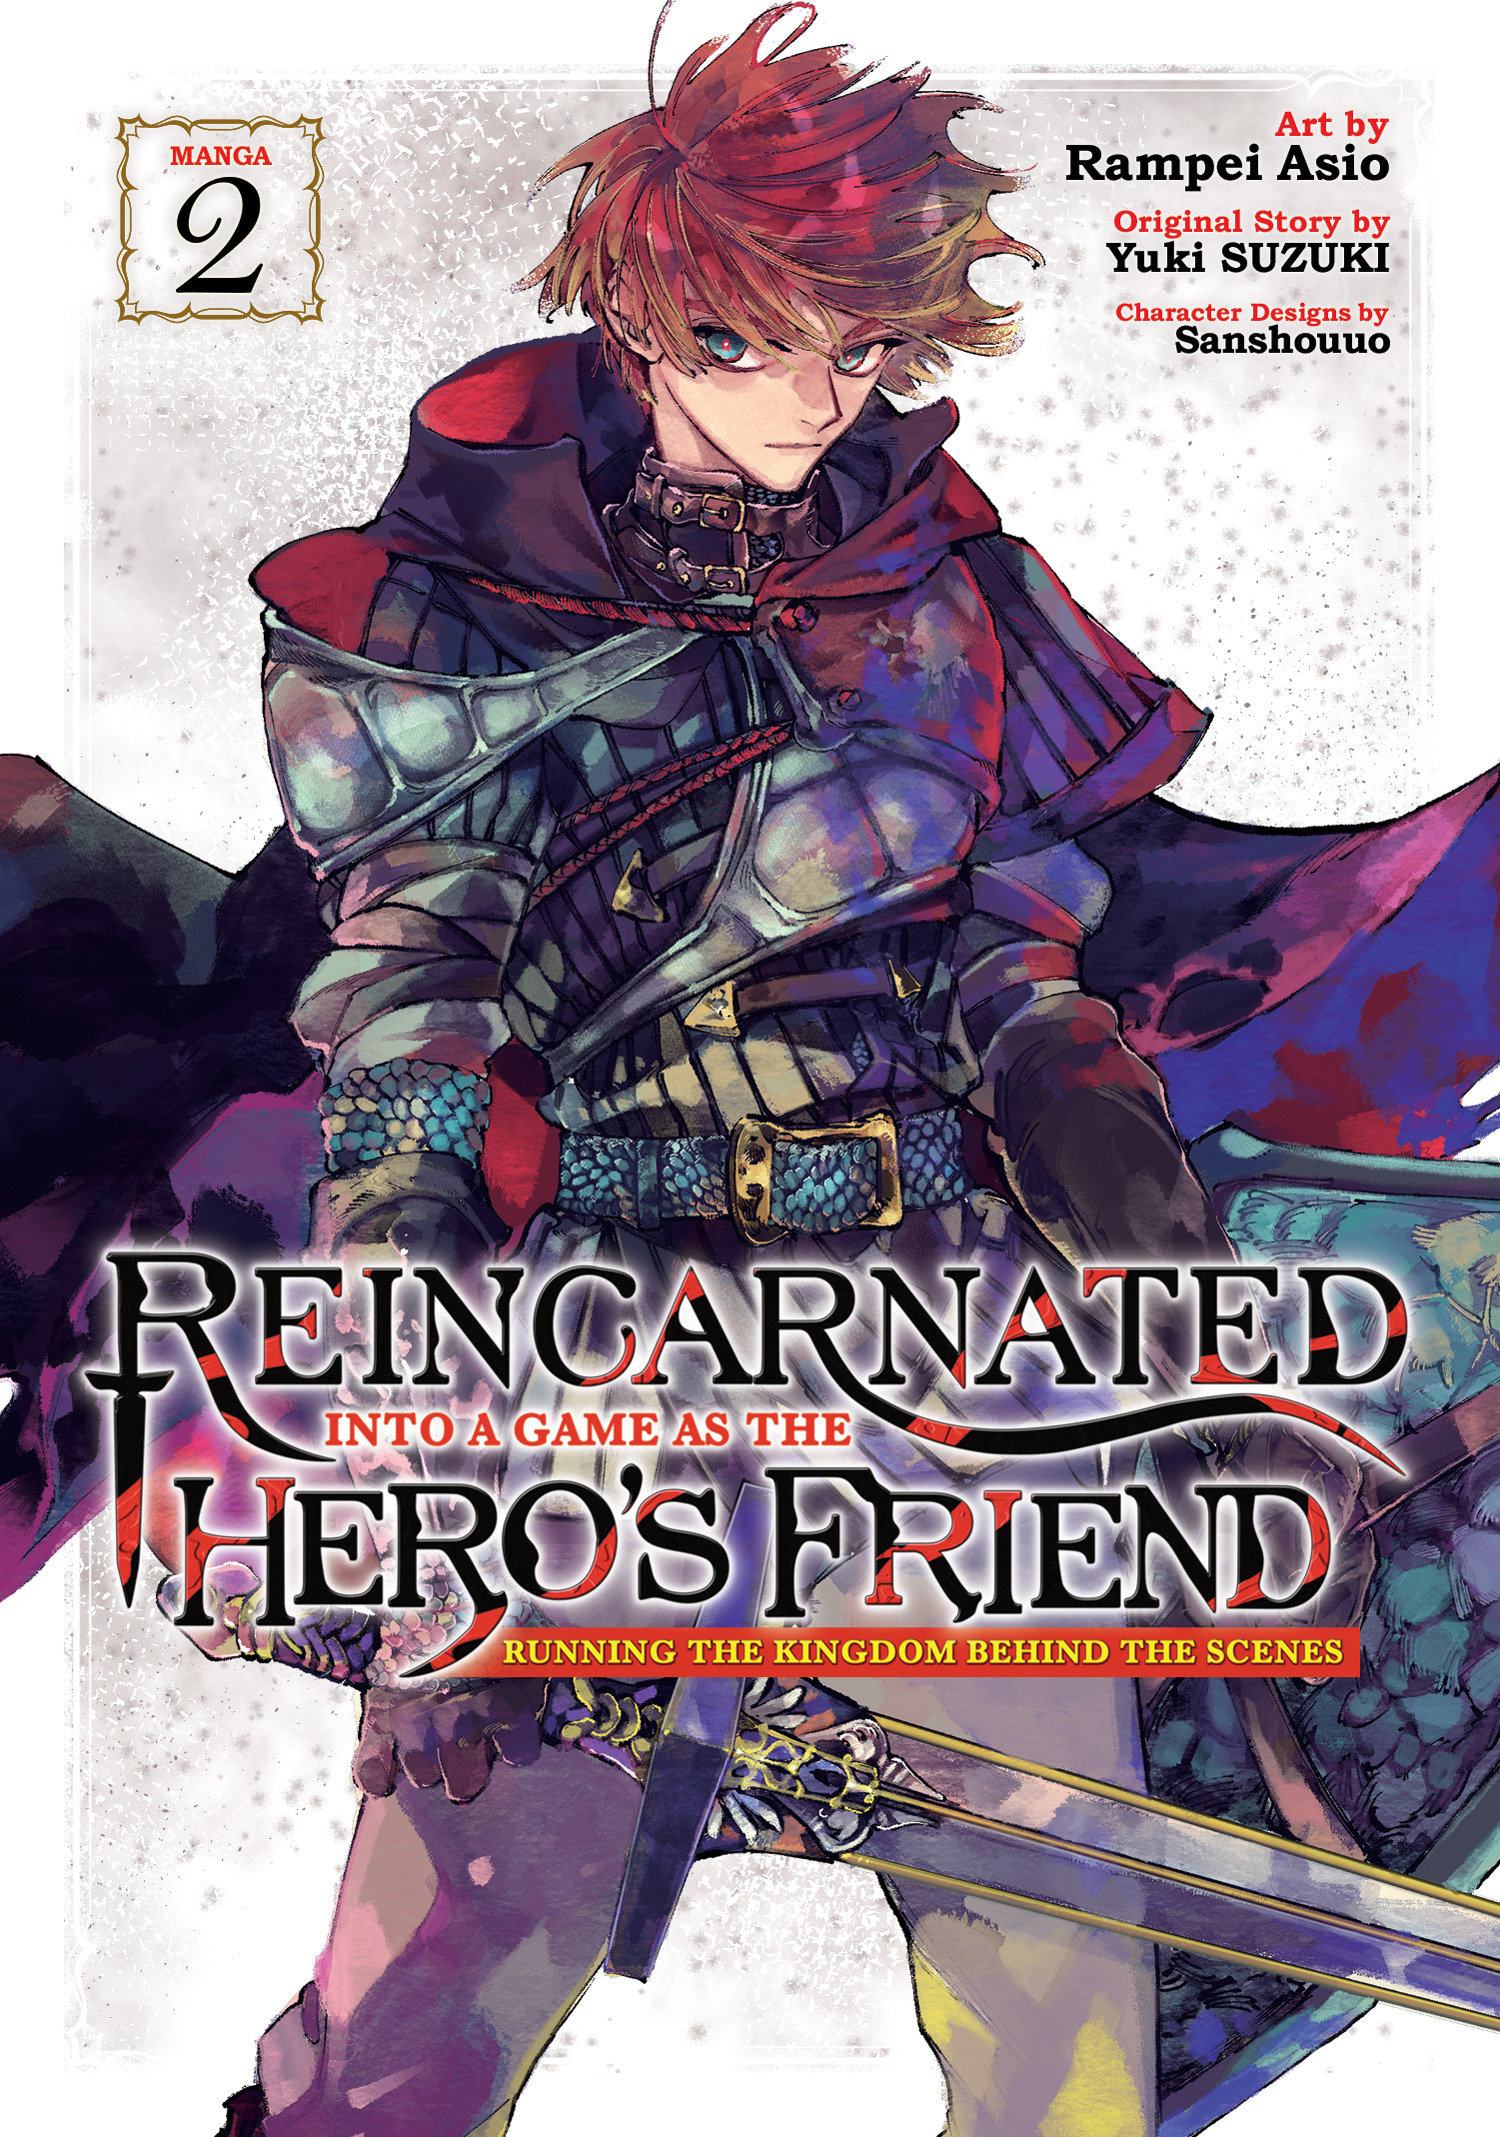 Reincarnated into a Game as the Hero's Friend Running the Kingdom Behind the Scenes Manga Volume 2